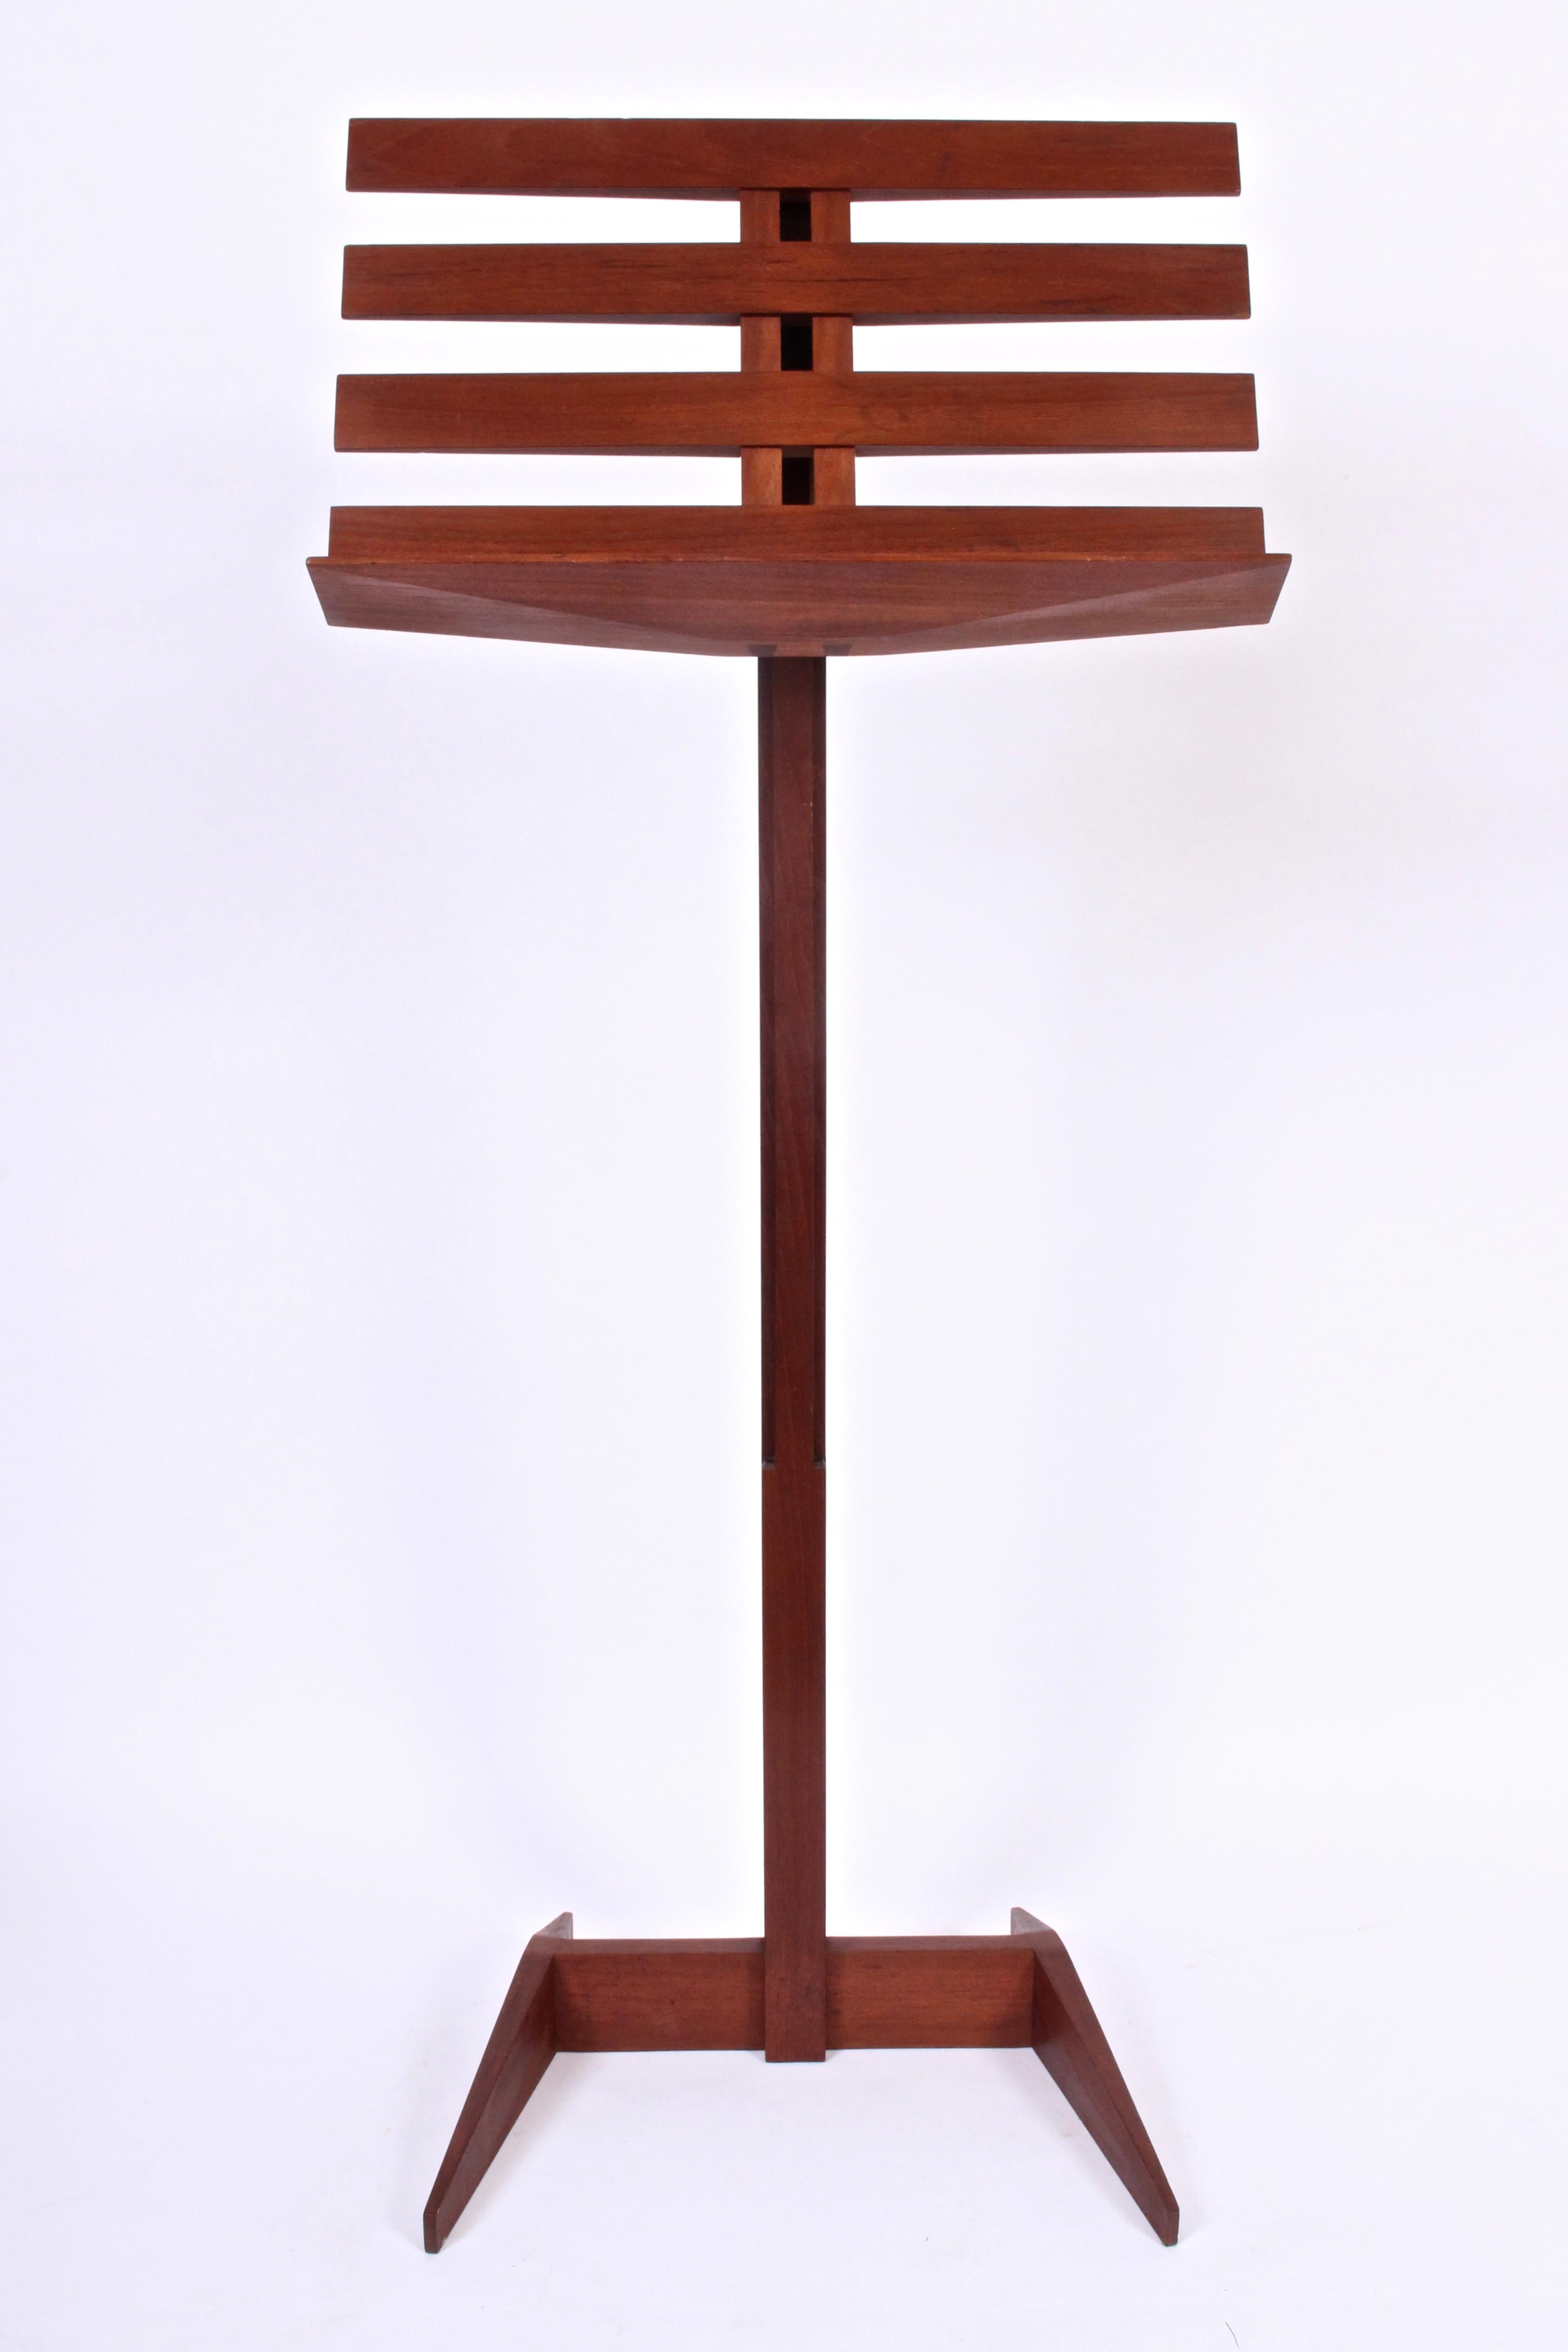 American New Hope School adjustable music stand, easel attributed Phillip Lloyd Powell, circa 1970. Featuring a smooth Walnut framework, handcrafted dovetail joints and functional brass knob. With adjustable shelf - lowers to 26 H.  Additional